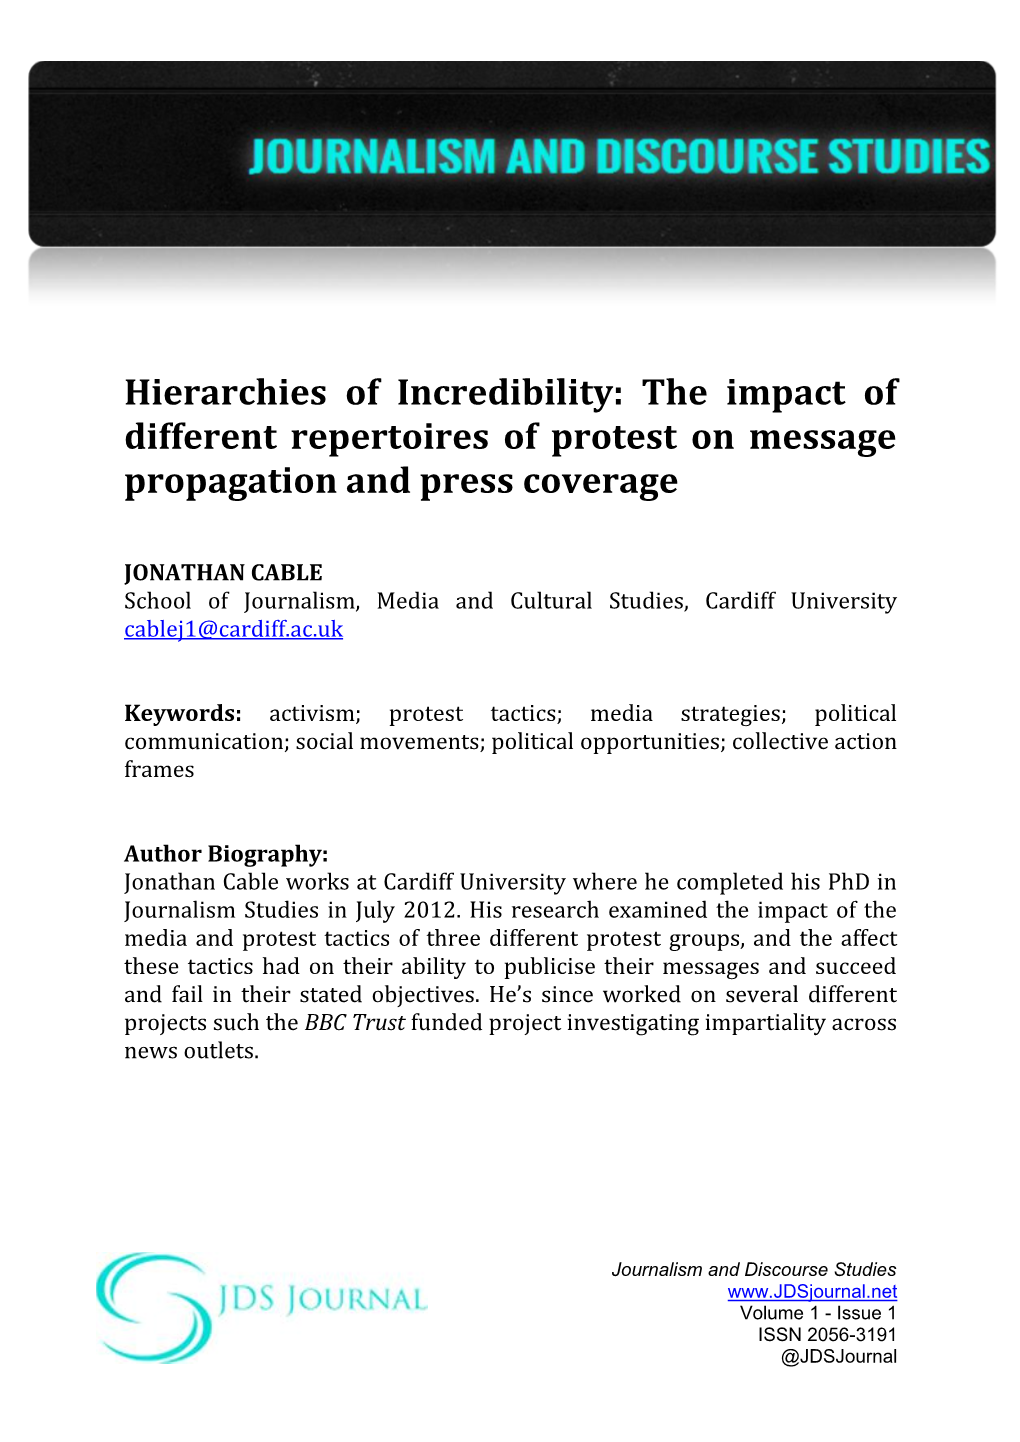 Hierarchies of Incredibility: the Impact of Different Repertoires of Protest on Message Propagation and Press Coverage